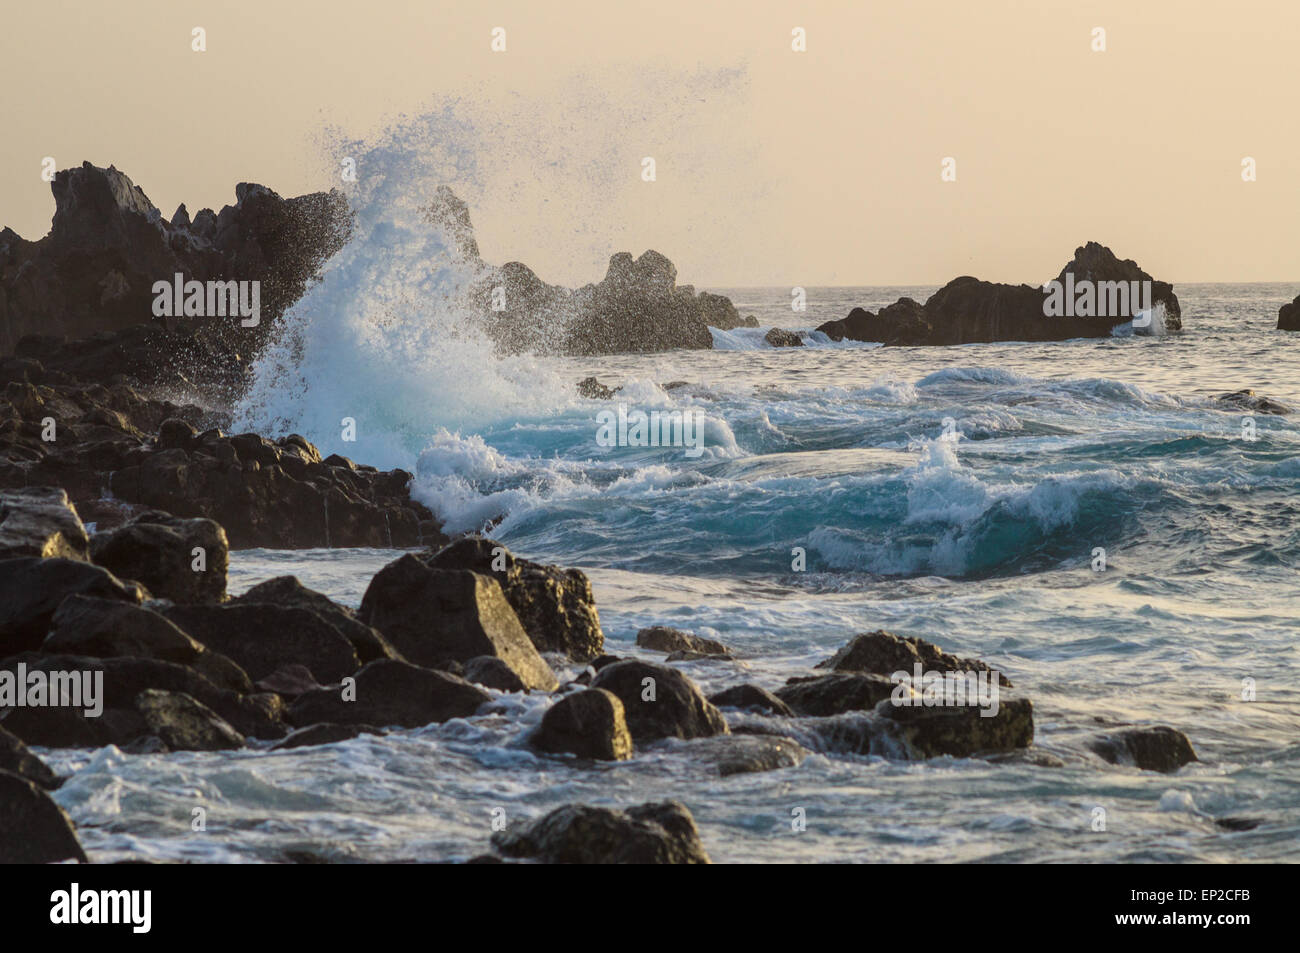 Big waves breaking on the rocky coast at sunset, Tenerife, Spain Stock Photo